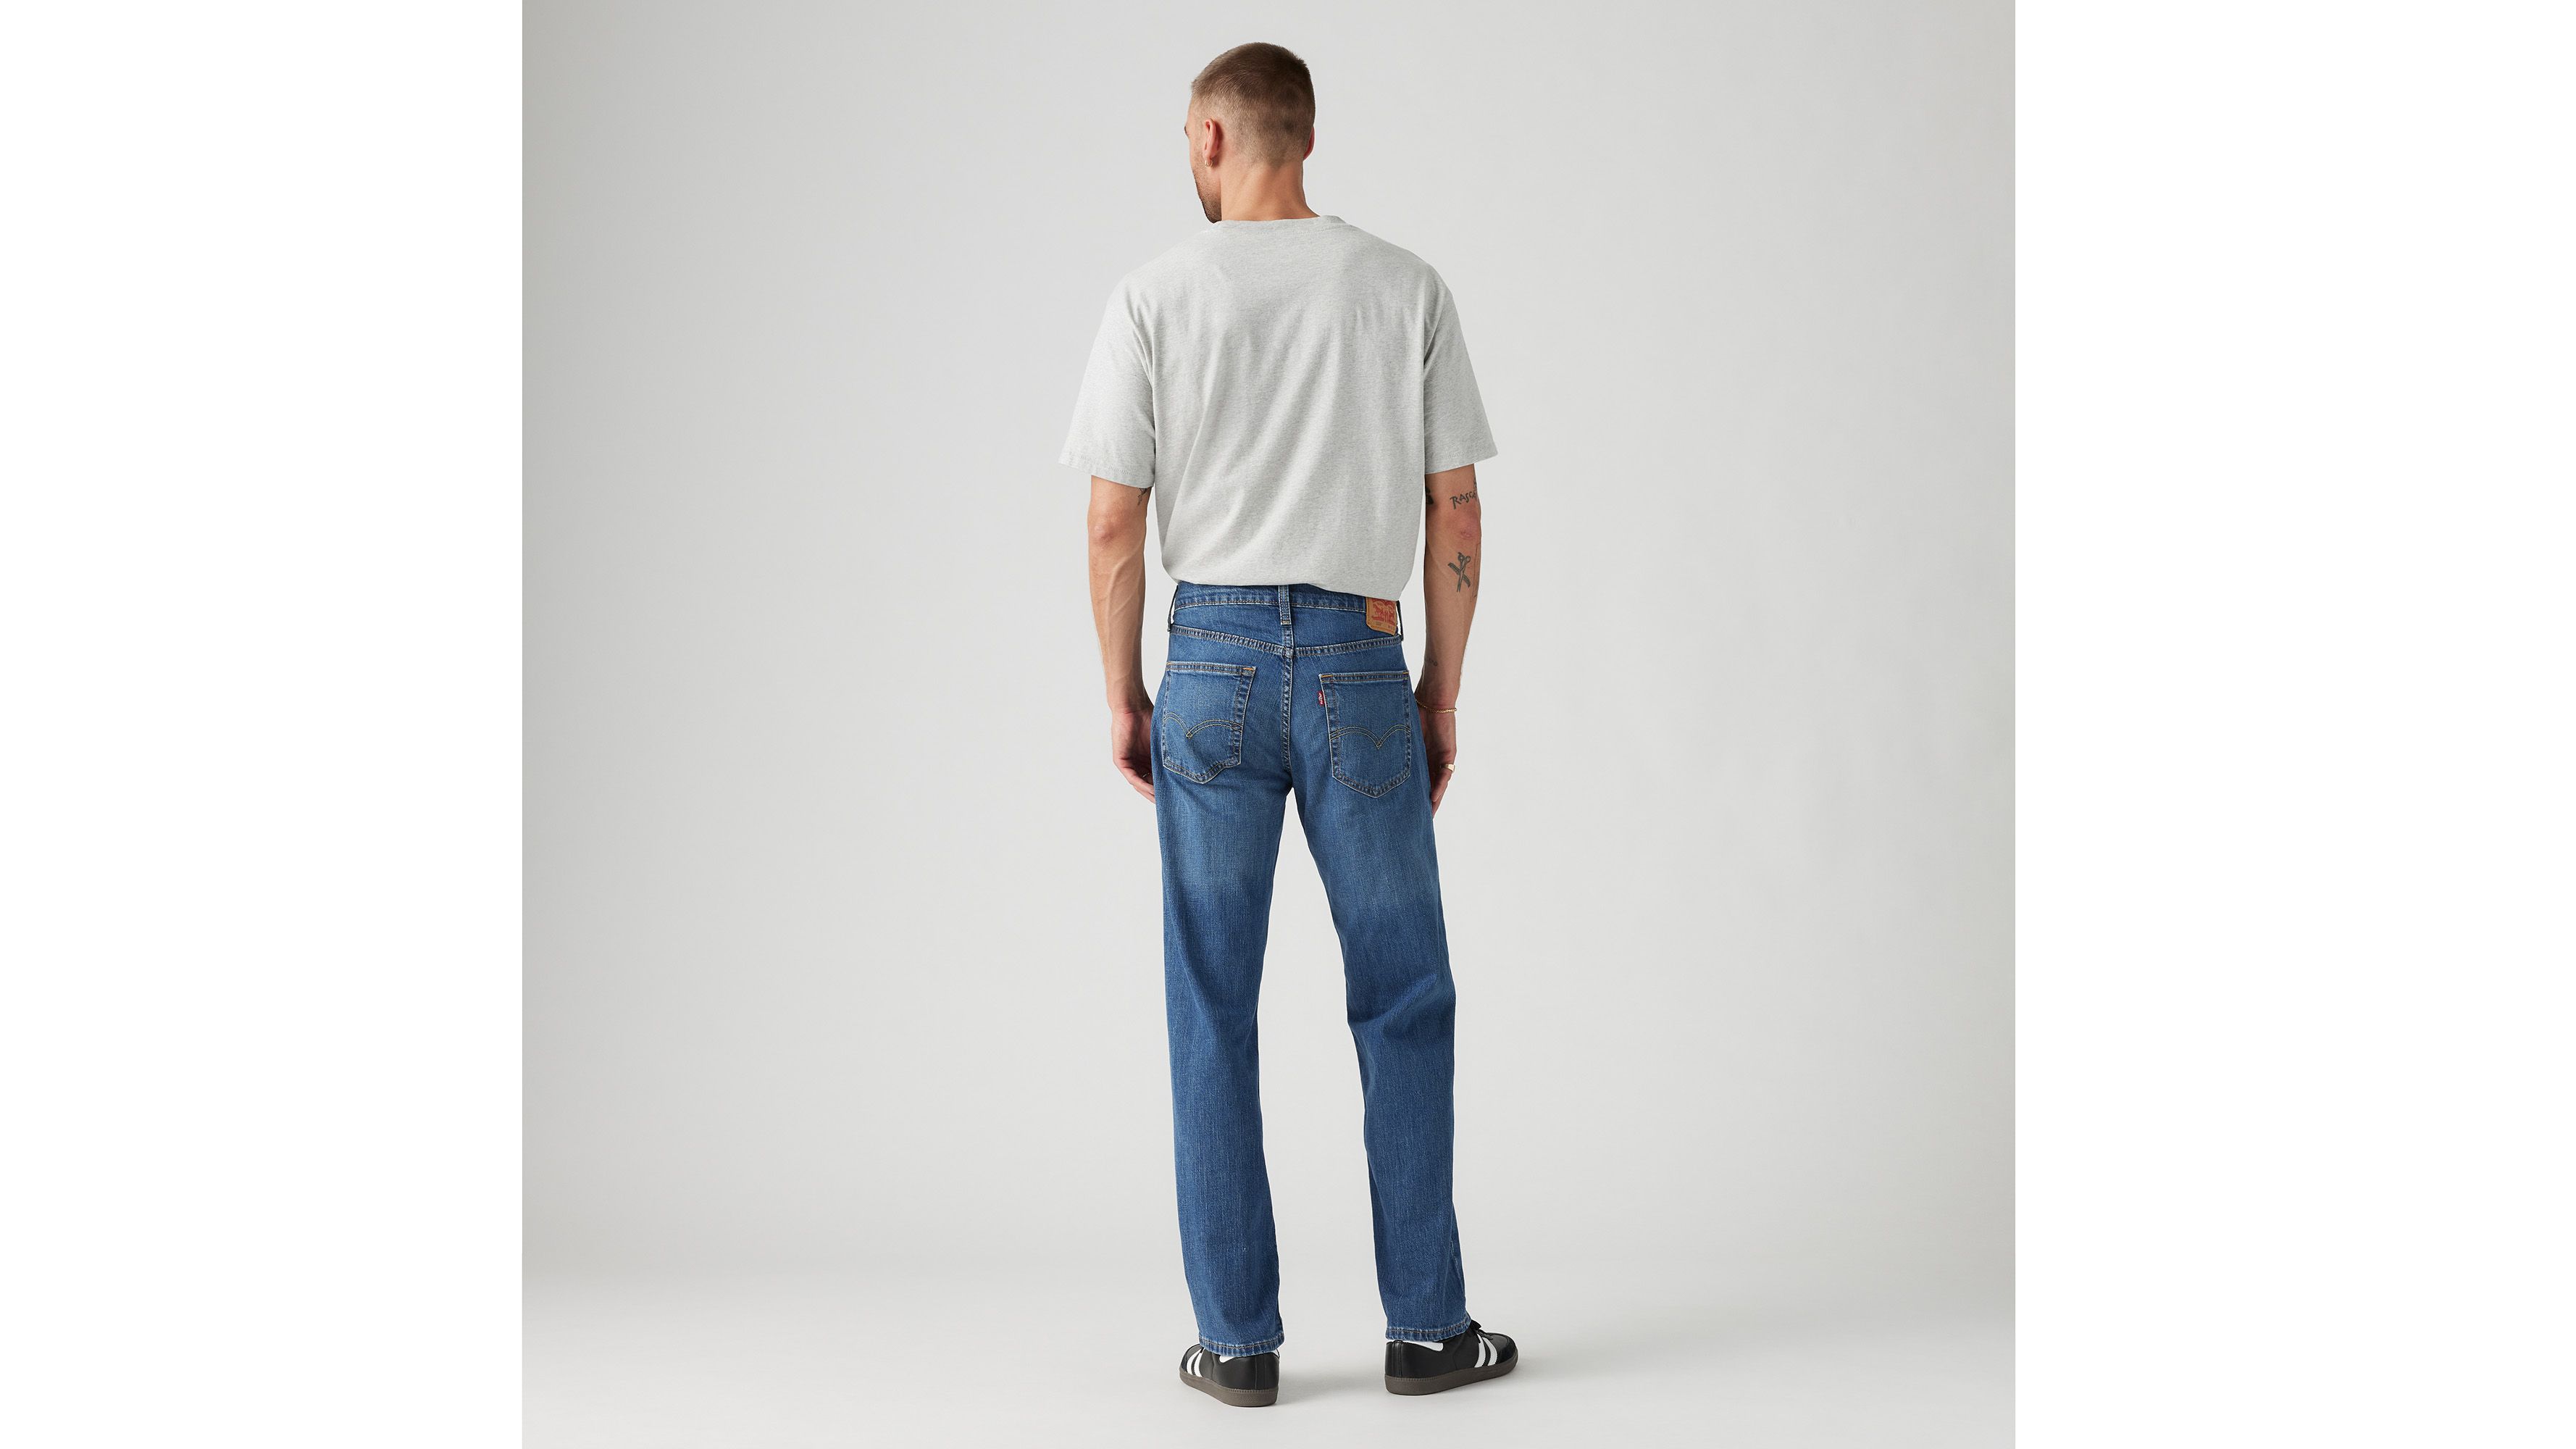 559™ Relaxed Straight Fit Men's Jeans - Medium Wash | Levi's® US